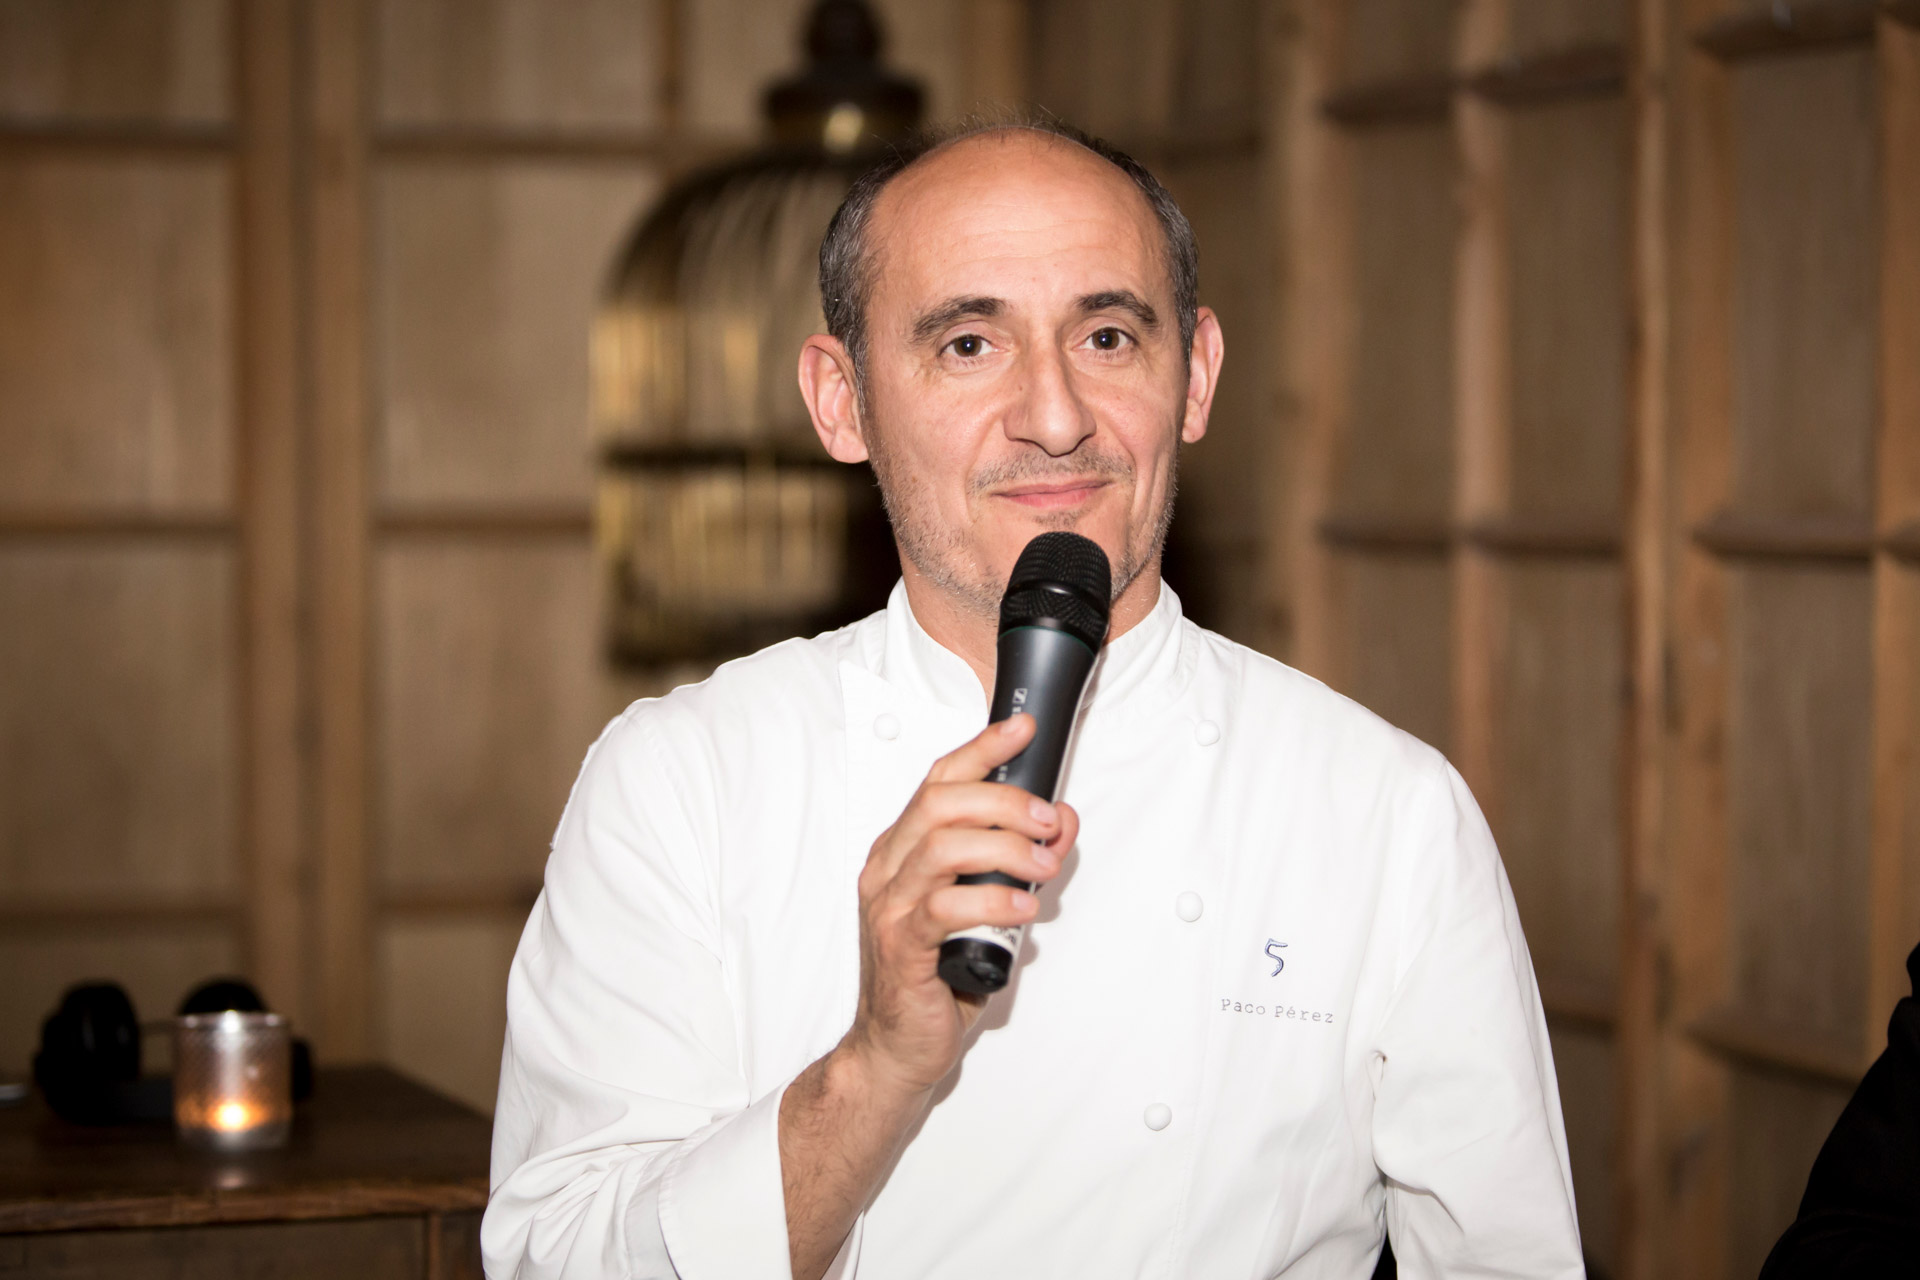 Paco Perez the 5 michelin stars chef coming to salute the guests at the end of the event in Barcelona during MWC